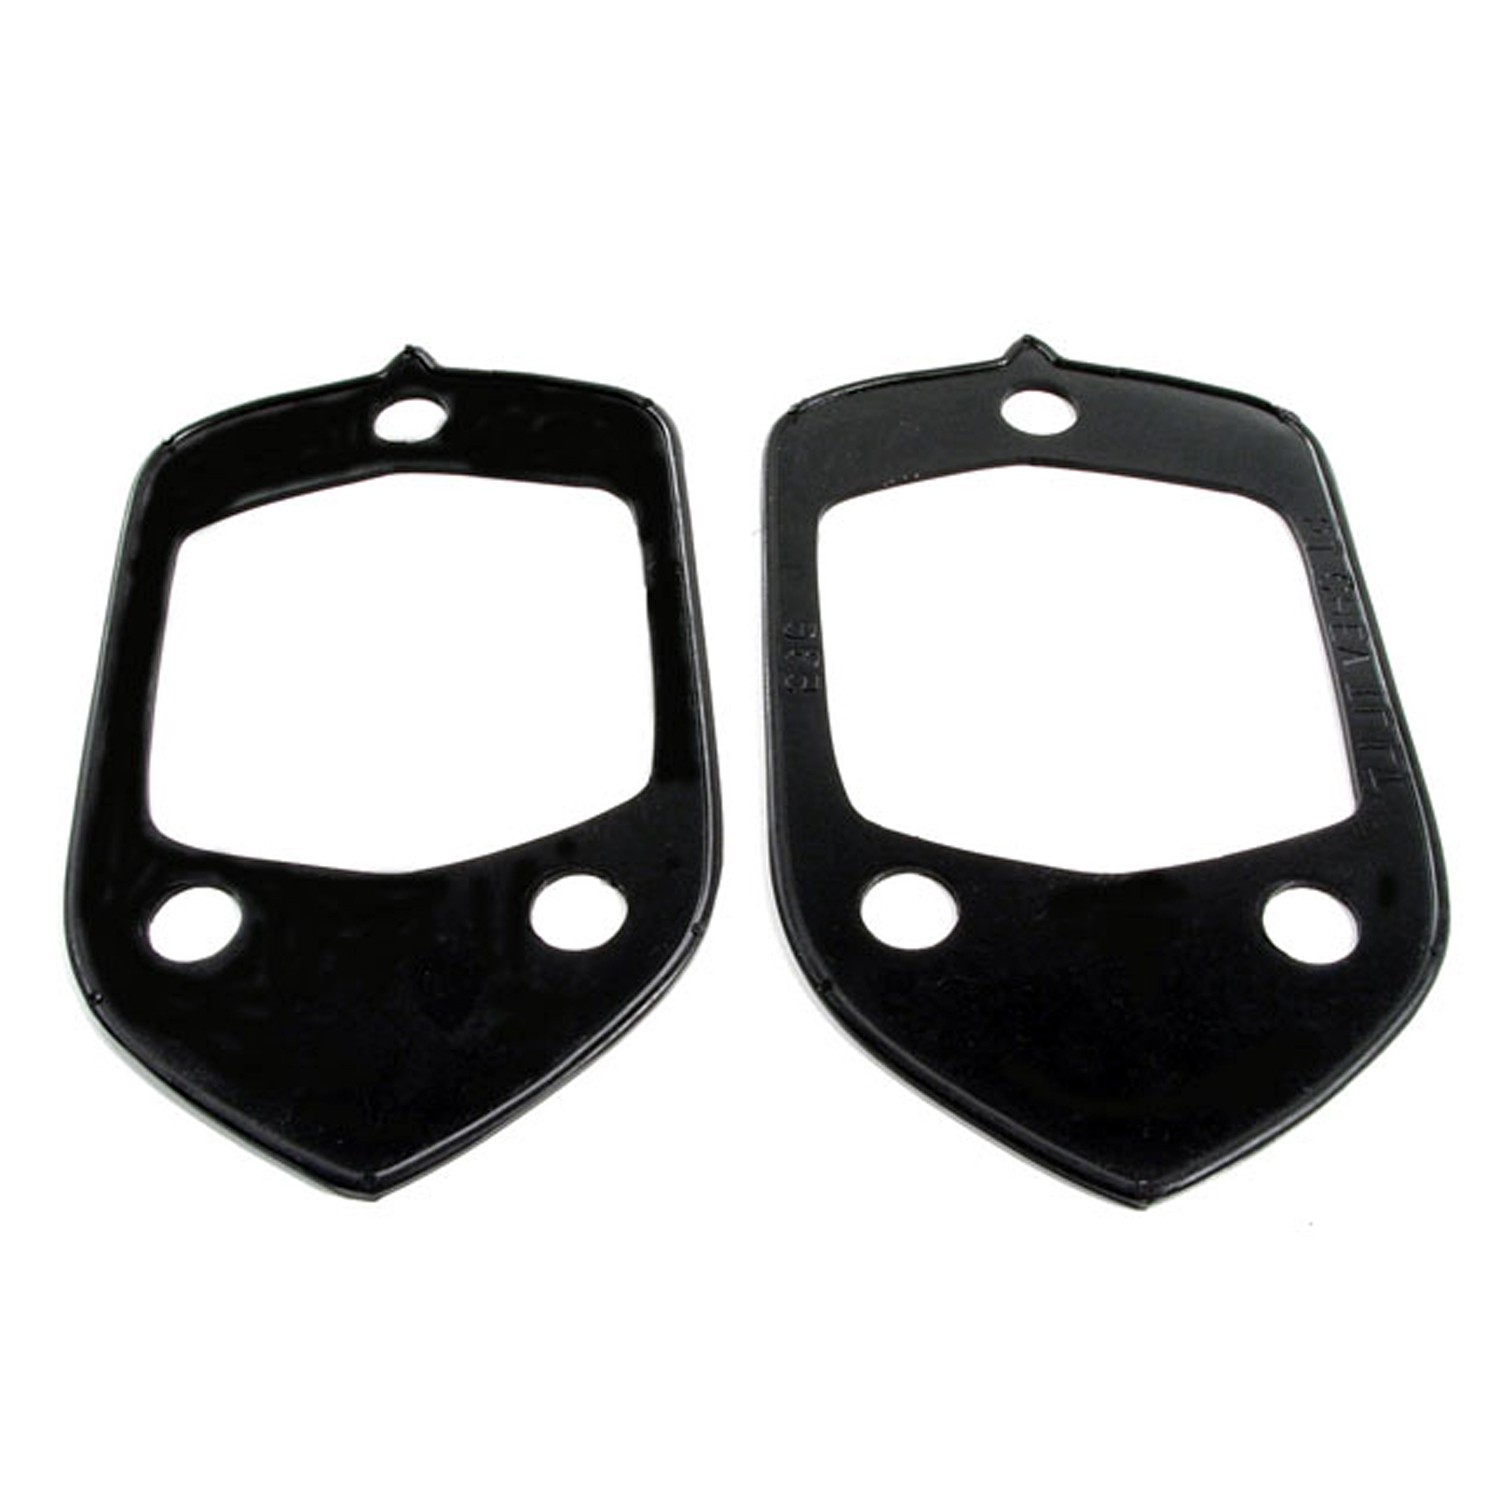 1952 Chevrolet Styleline Special Tail-light Pads.  3-7/8 wide X 6-5/8 long.  Pair-MP 536